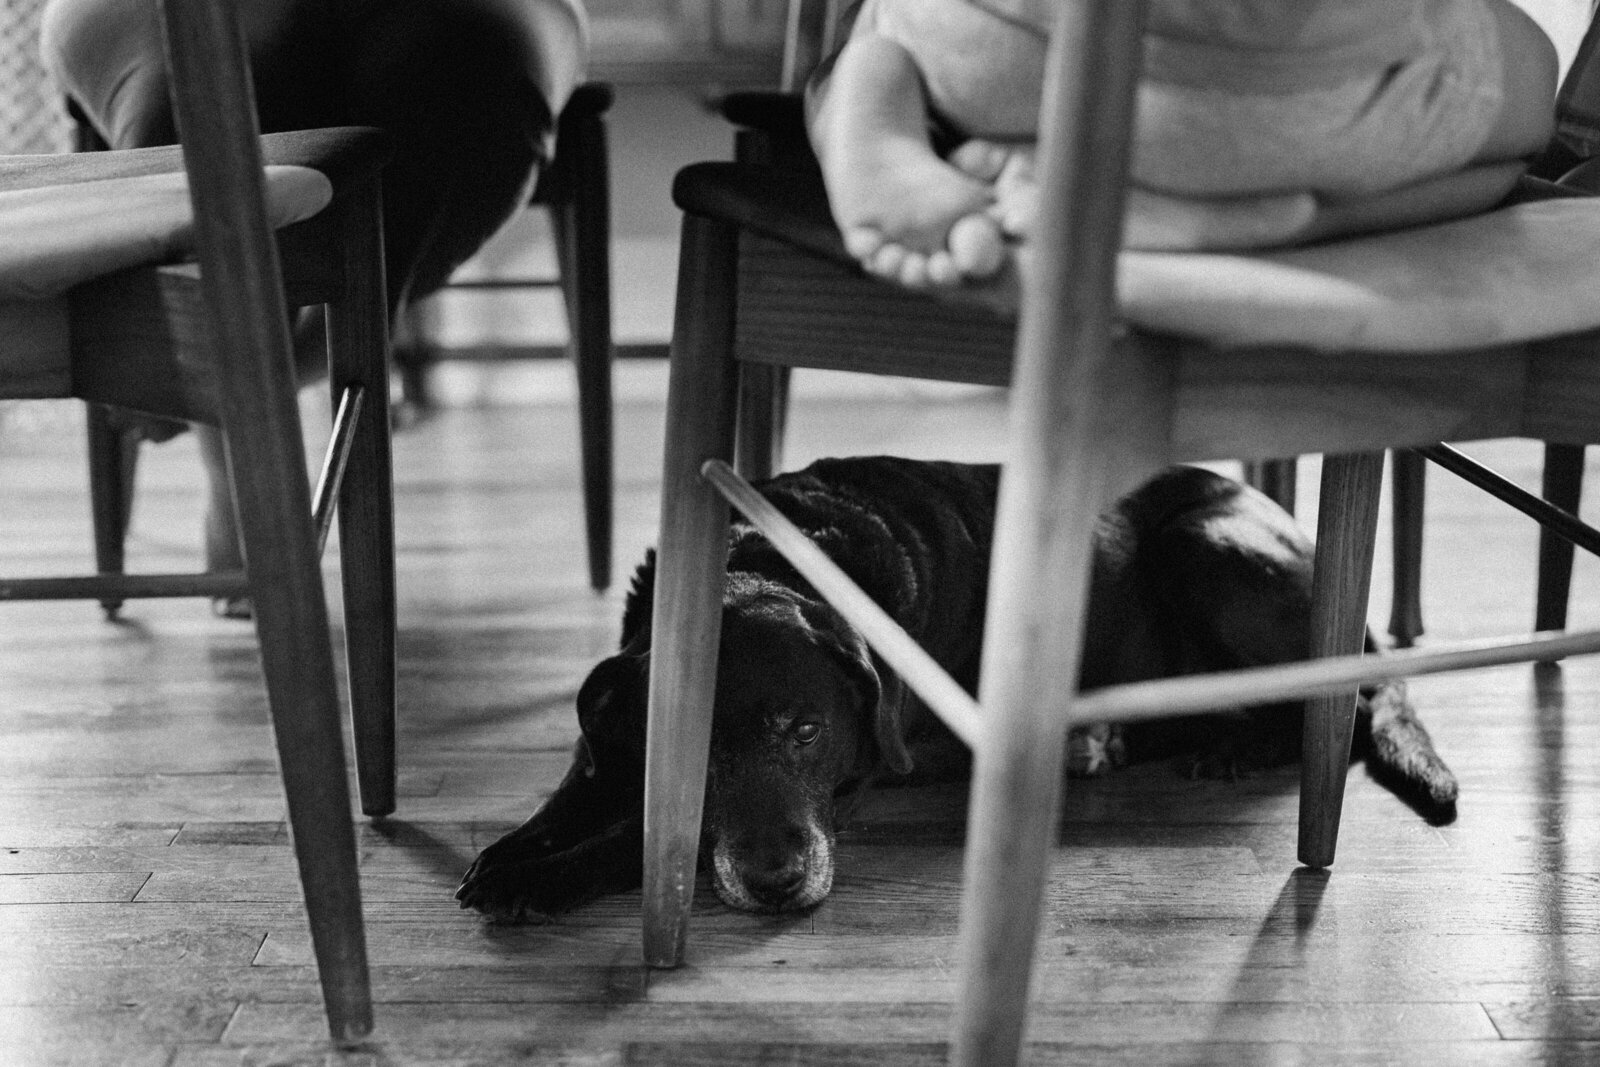 A dog naps under the table while the family eats breakfast above